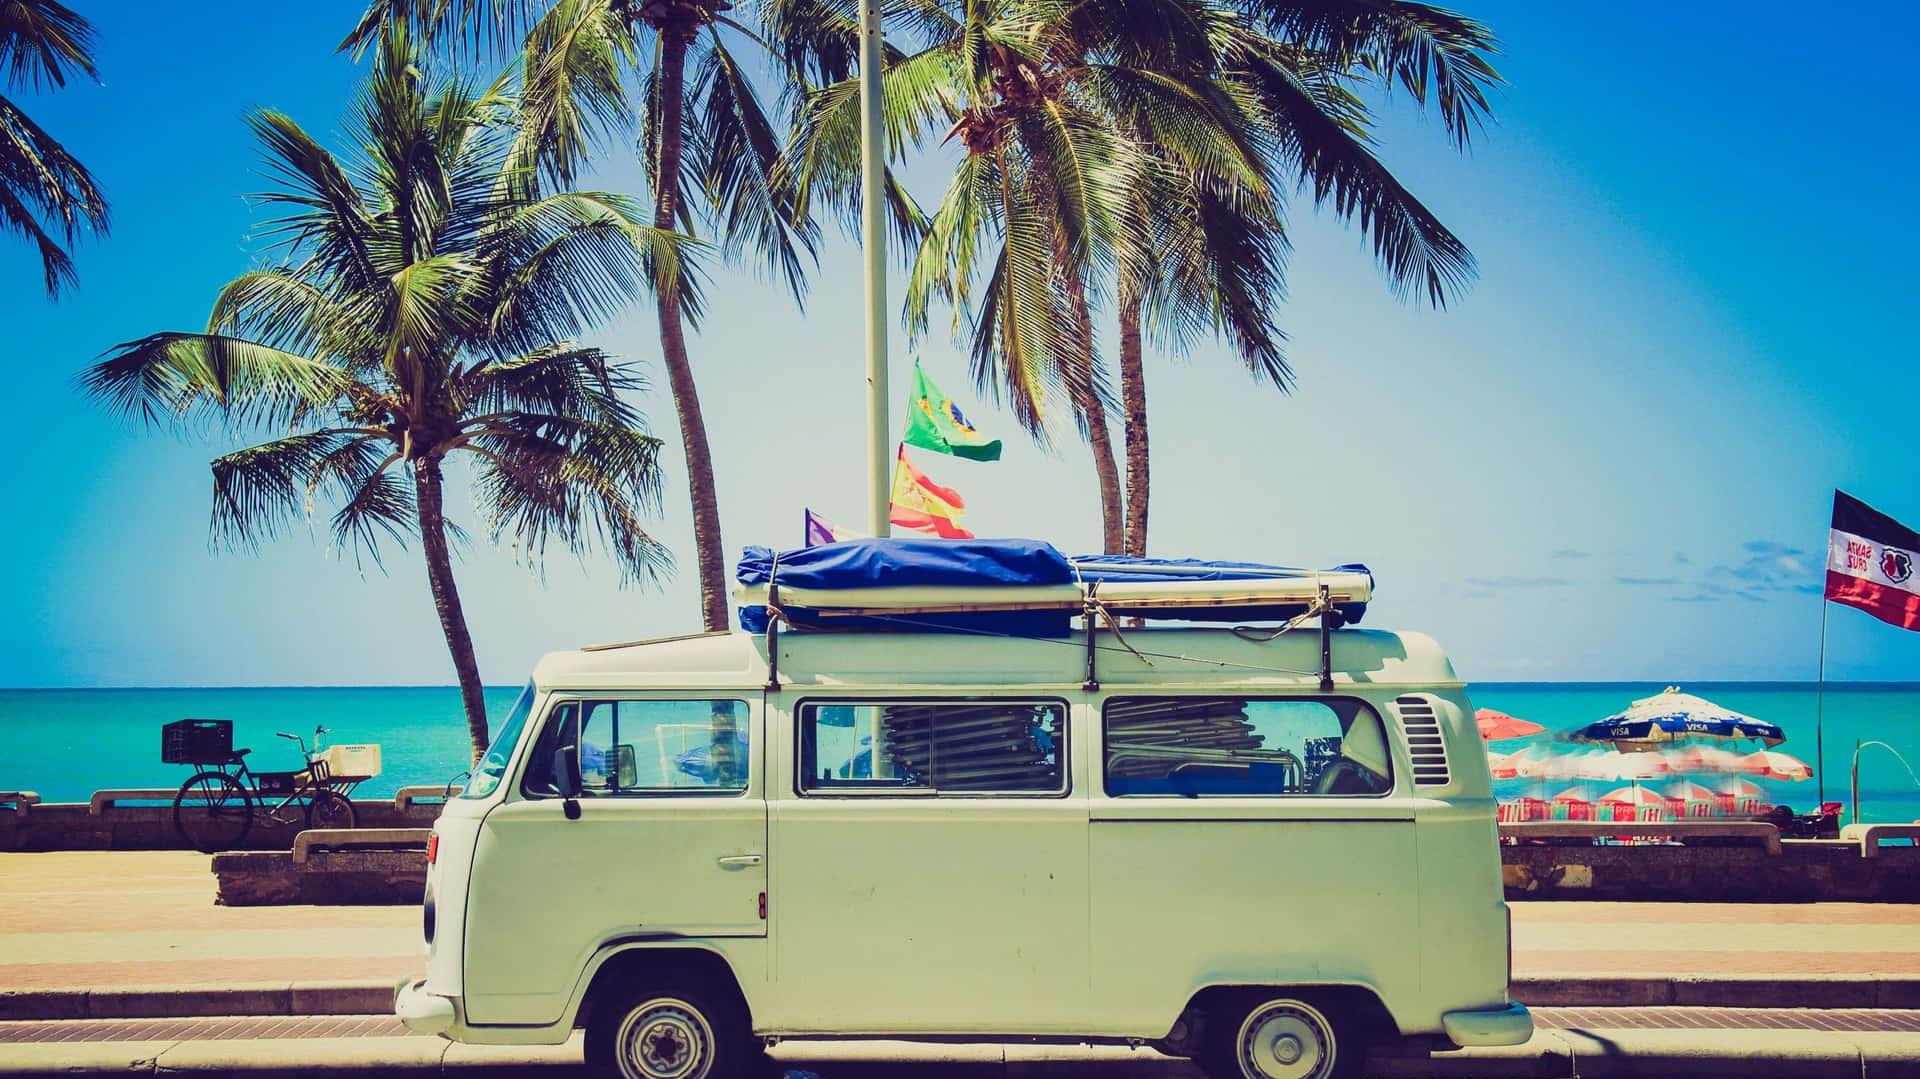 A Vw Bus Parked On The Beach With Palm Trees Wallpaper